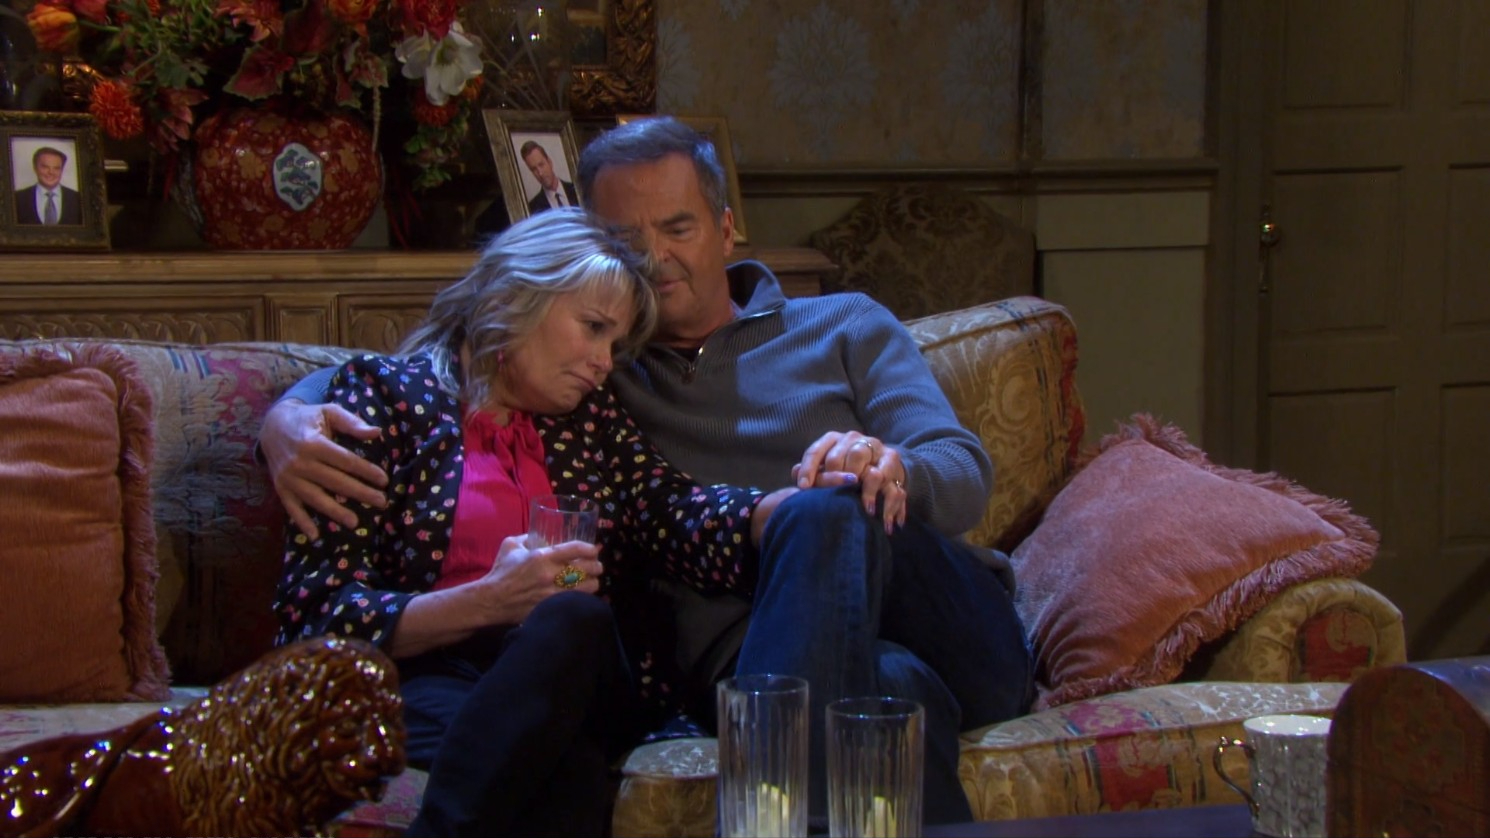 justin cuddle bonnie days of our lives recaps soapsspoilers